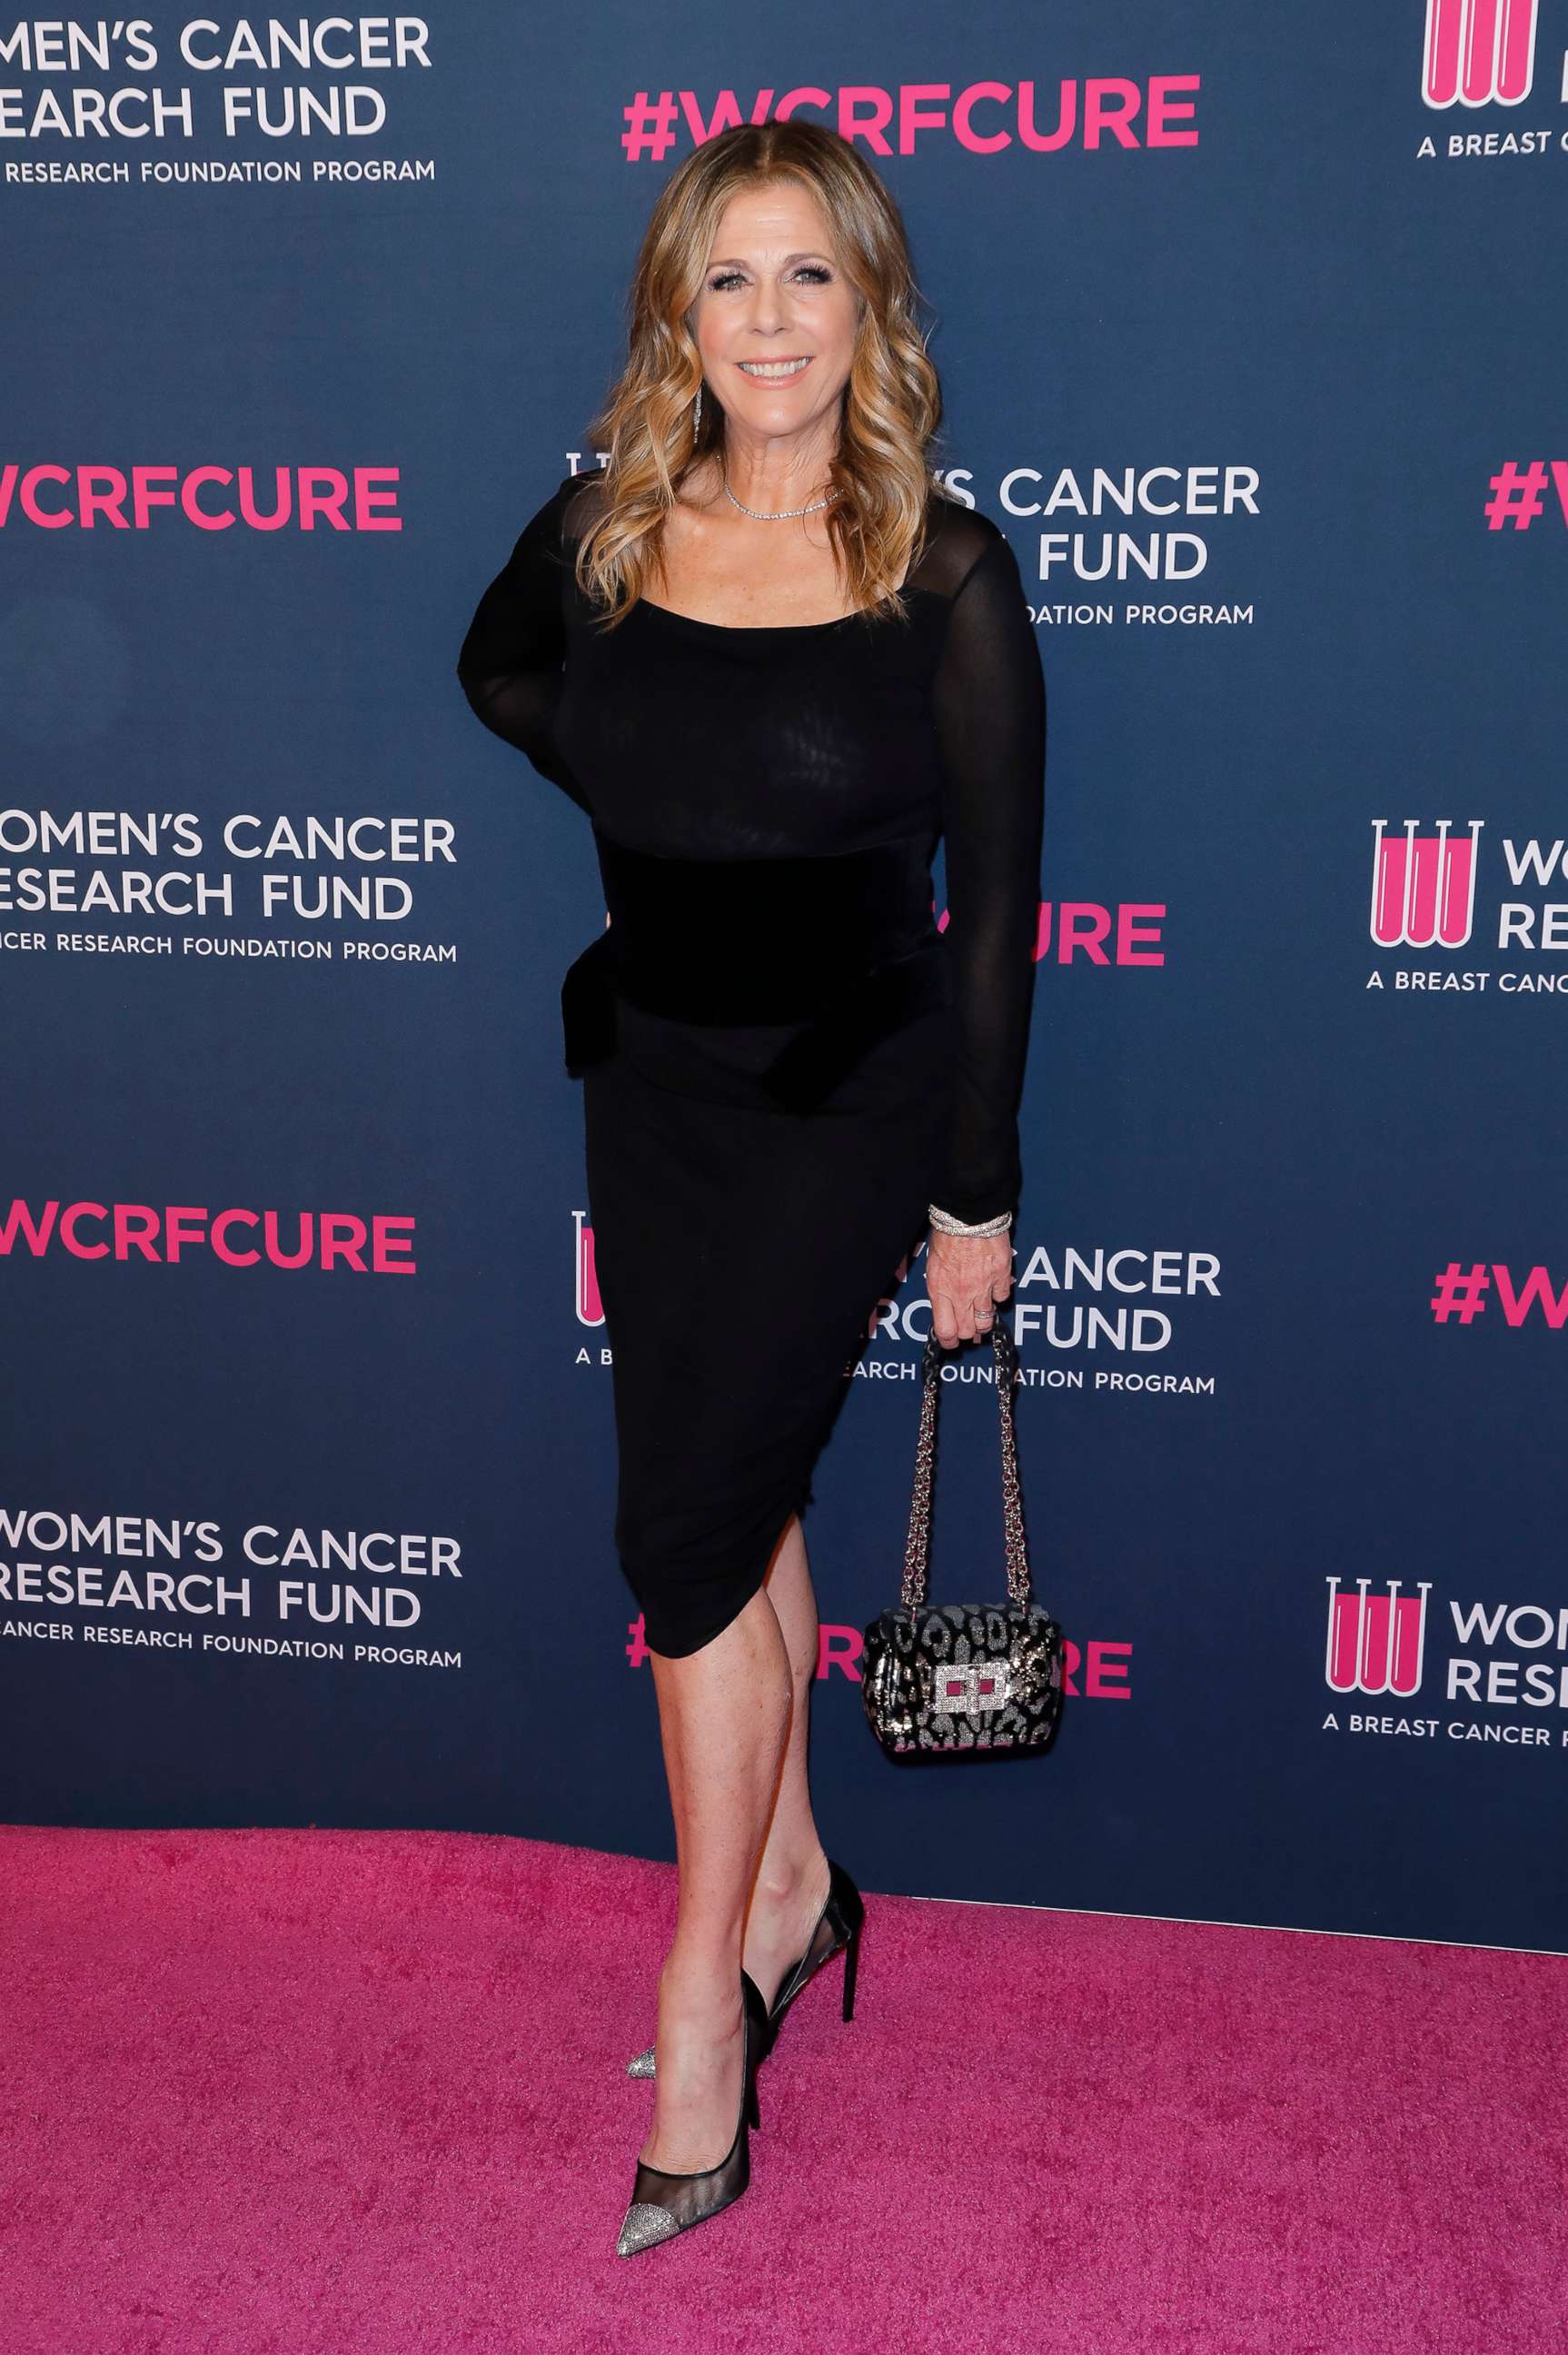 PHOTO: In this Feb. 27, 2020, file photo, Rita Wilson attends The Women's Cancer Research Fund's Unforgettable Evening 2020 in Beverly Hills, Calif.